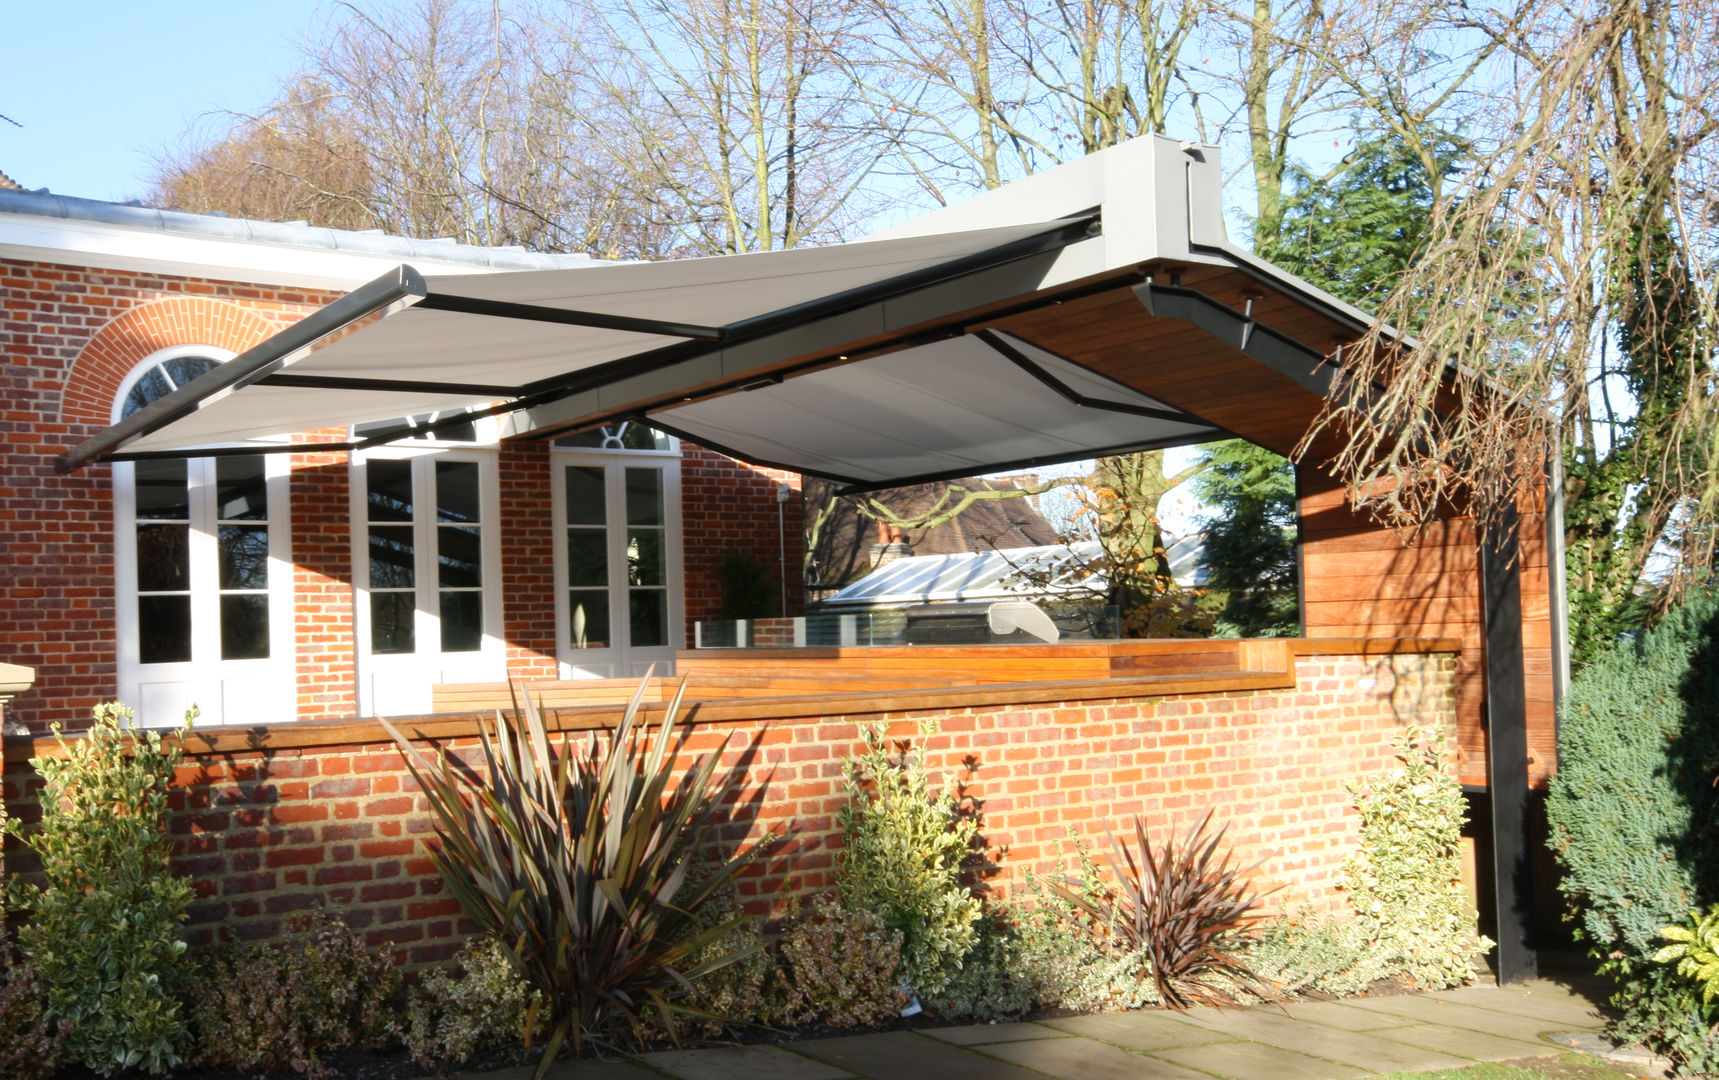 Patio Awning Installation in Cheshire. homify بلكونة أو شرفة patio,awning,terrace,canopy,garden,alfresco,shading